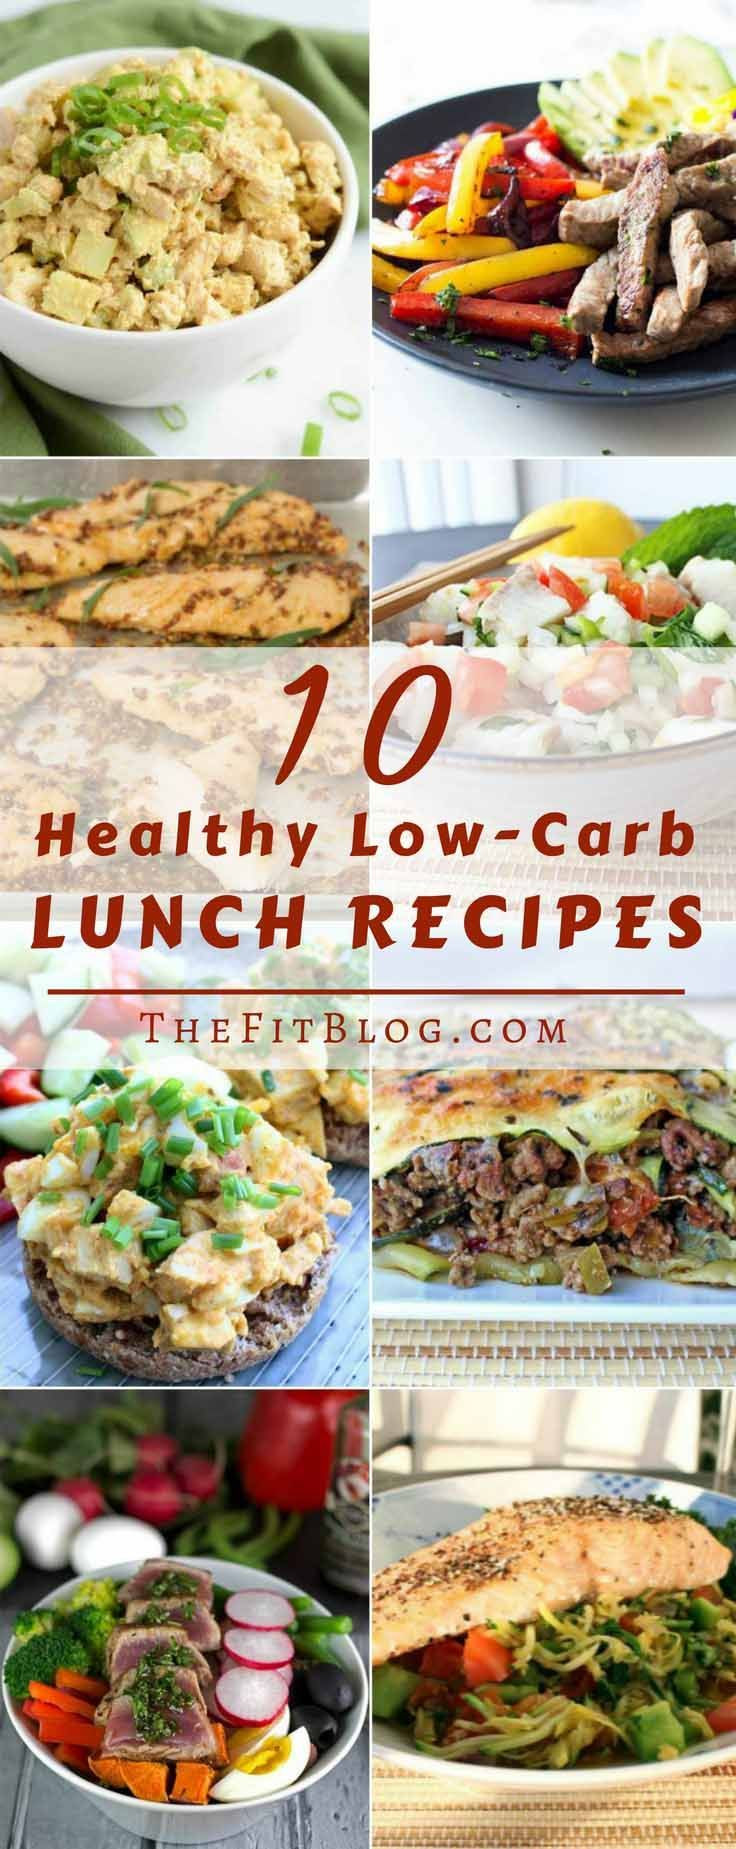 Diabetic Recipes For Lunch
 17 Best images about Healthy Food Recipes Salads Meals